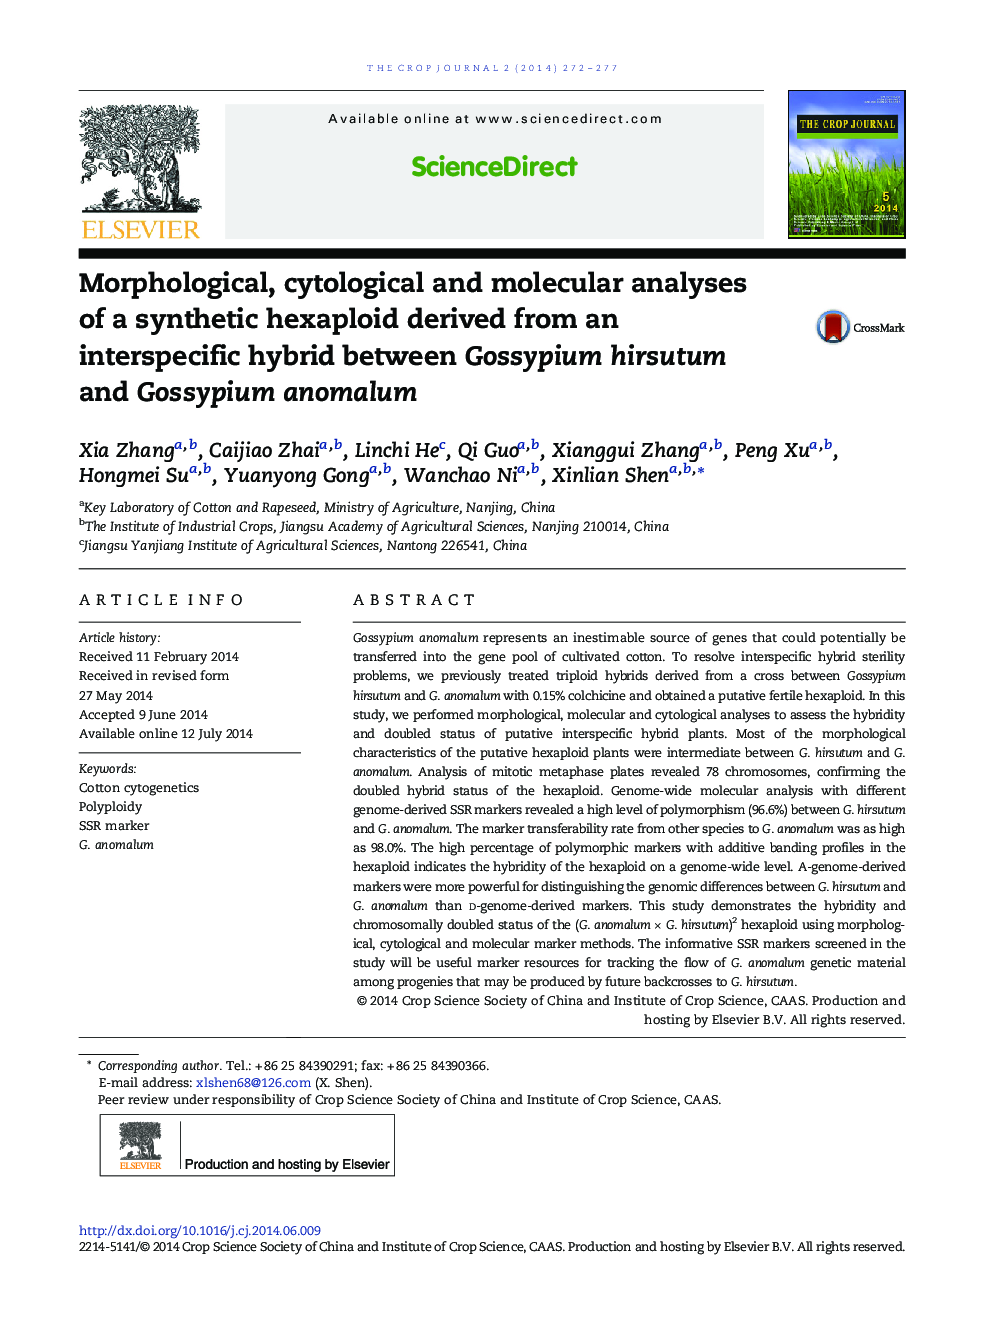 Morphological, cytological and molecular analyses of a synthetic hexaploid derived from an interspecific hybrid between Gossypium hirsutum and Gossypium anomalum 